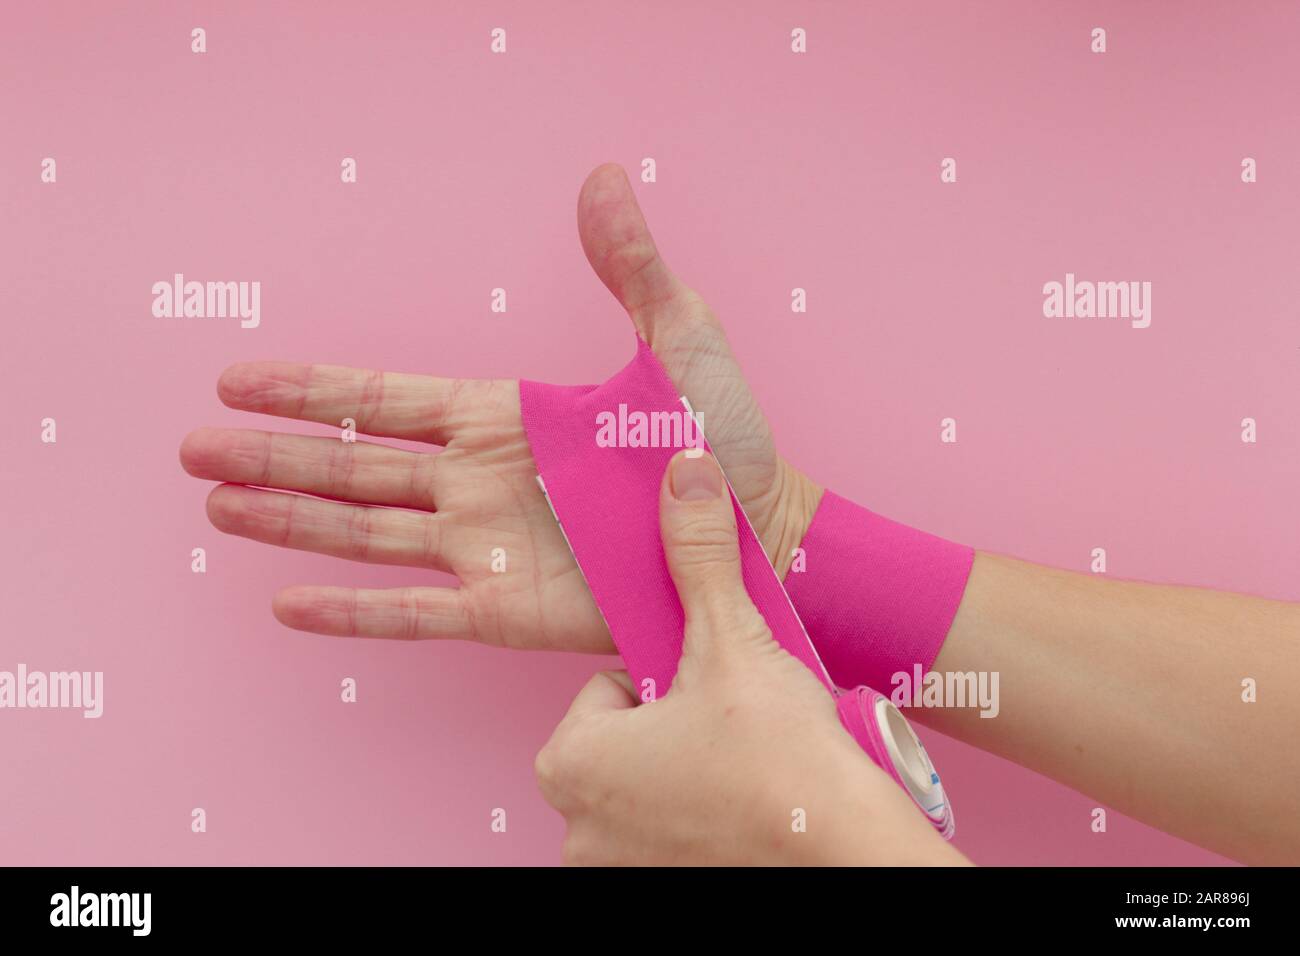 Appling a kinesio tape to hand isolated on pink background. Physiotherapy  tape for wrist pain, aches and tension. elastic therapeutic tape. adhesive  Stock Photo - Alamy